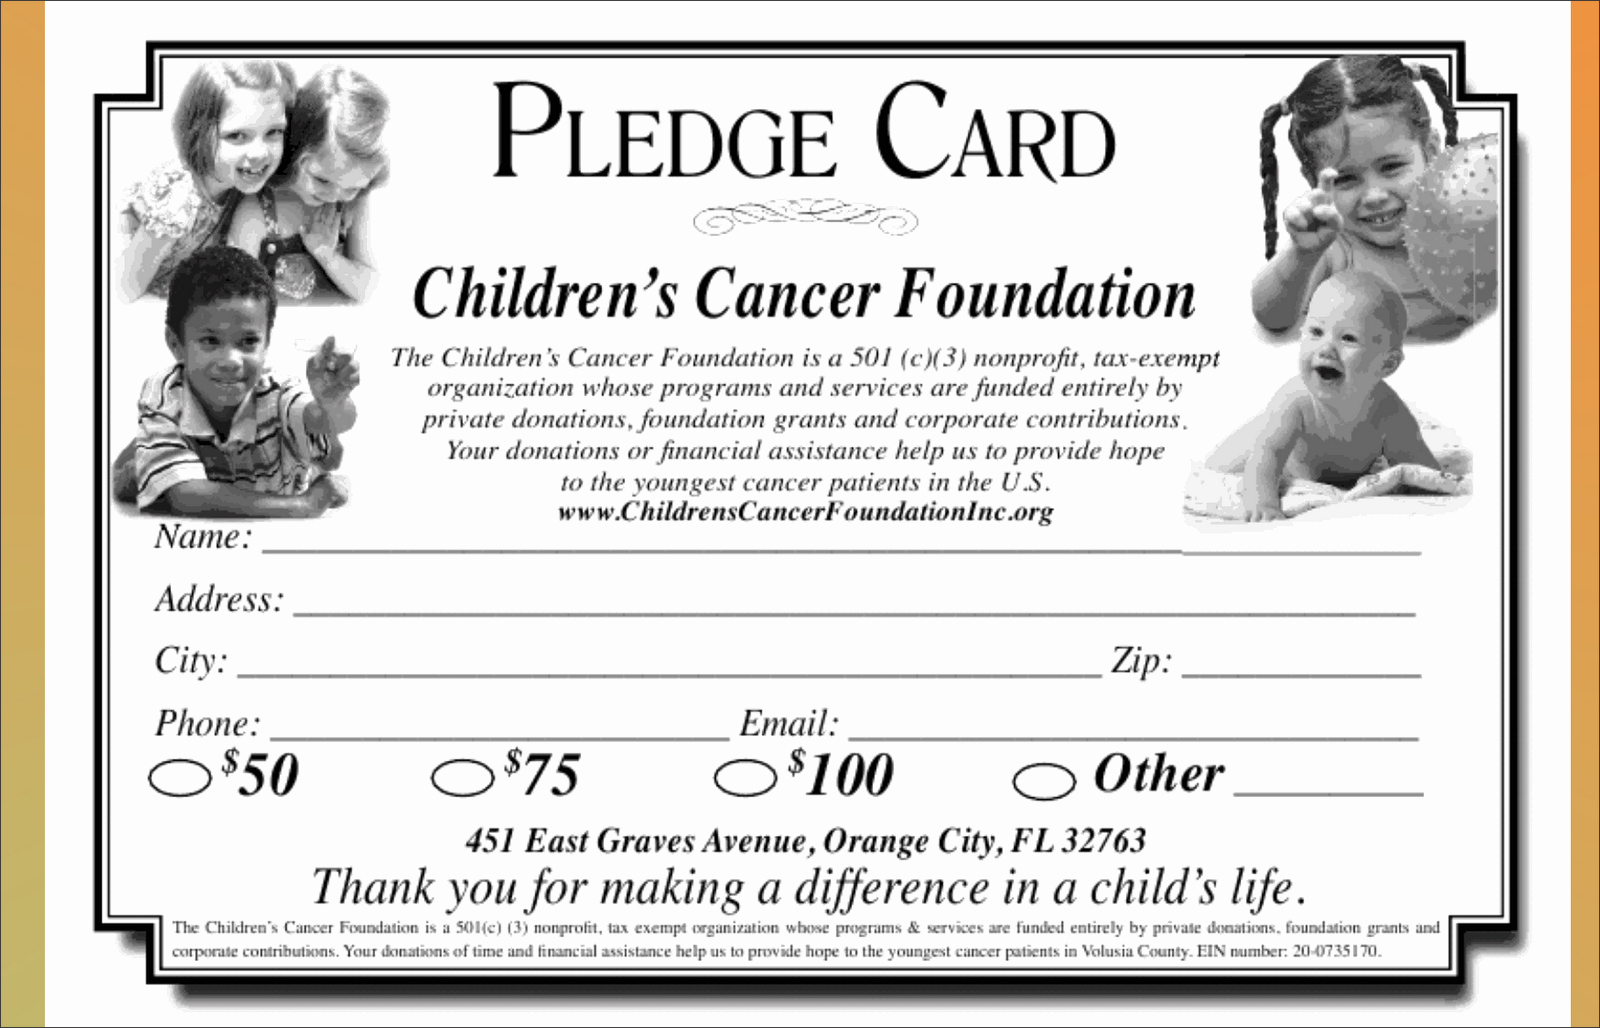 Donor Pledge Card Template Unique Childhood Cancer Foundation Inc Pledge Card for 2011